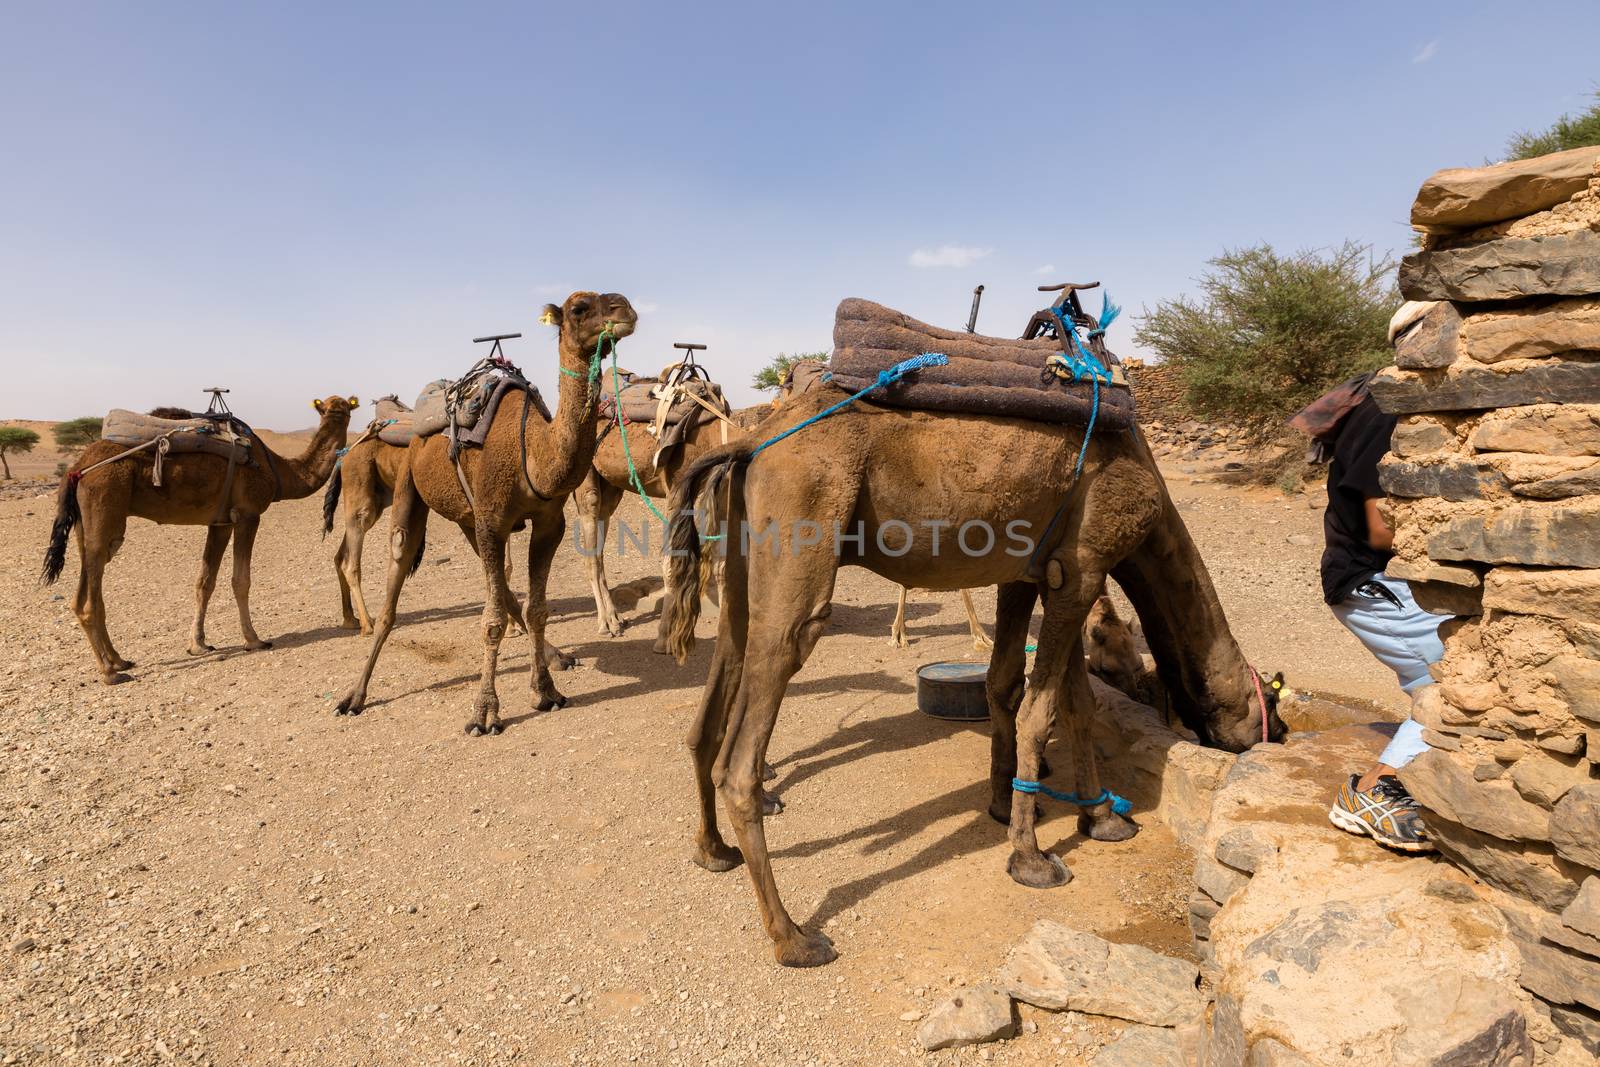 camels drink water from a well in the Sahara desert, Morocco